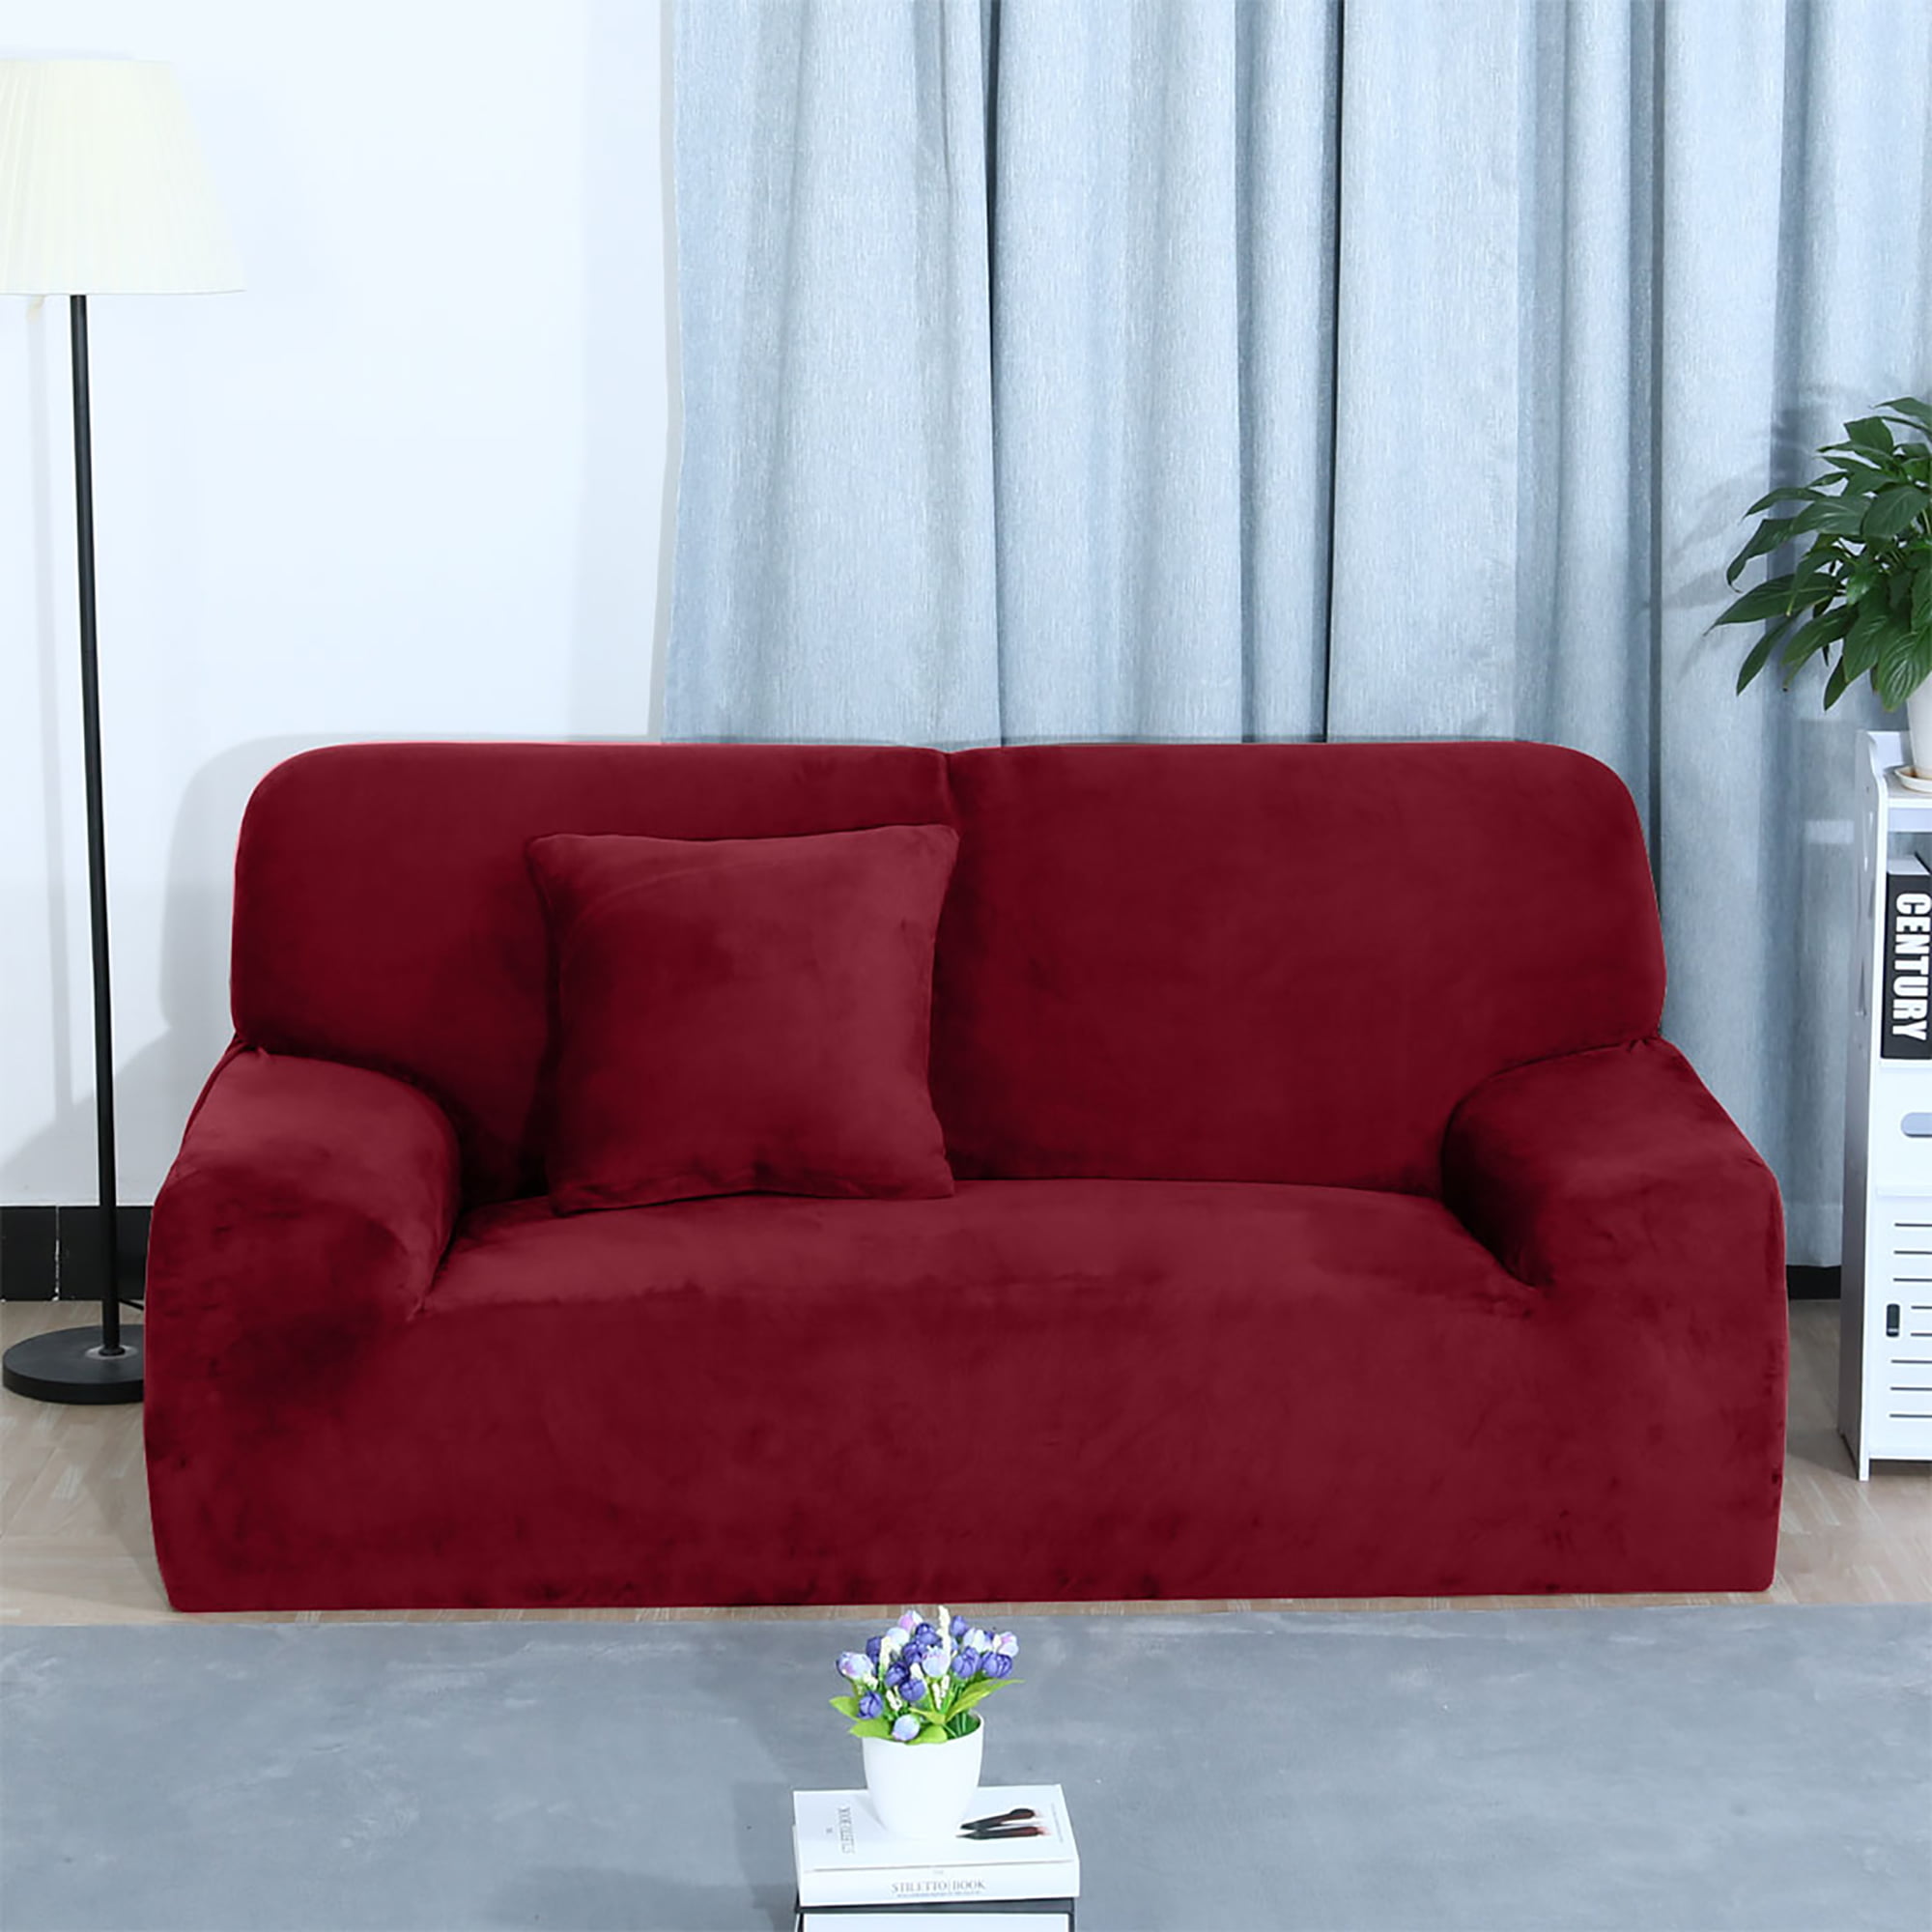 Details about   Spandex Stretch Couch Cover 4 Seater Slipcover Sofa Covers Furniture Protector 